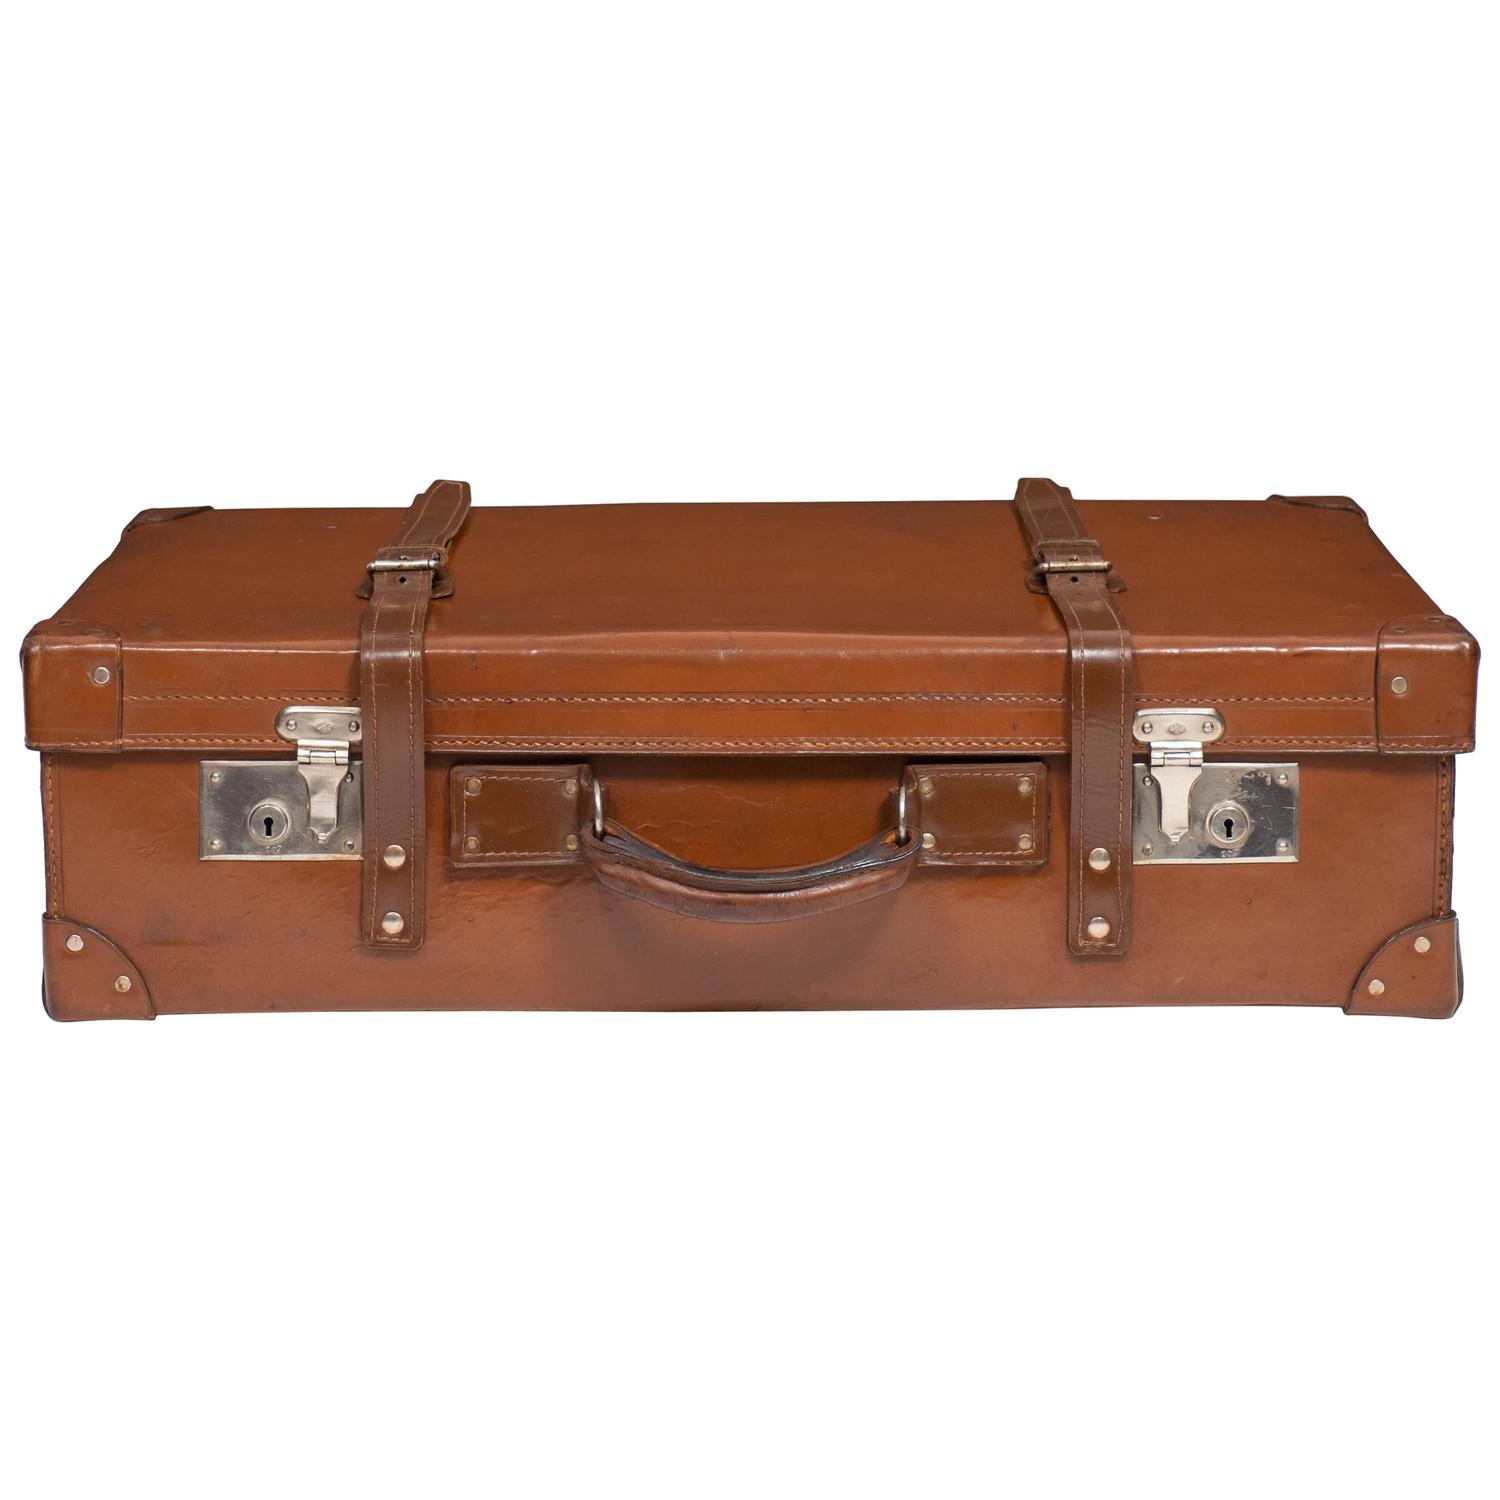 French Vintage Leather Suitcase For Sale at 1stdibs